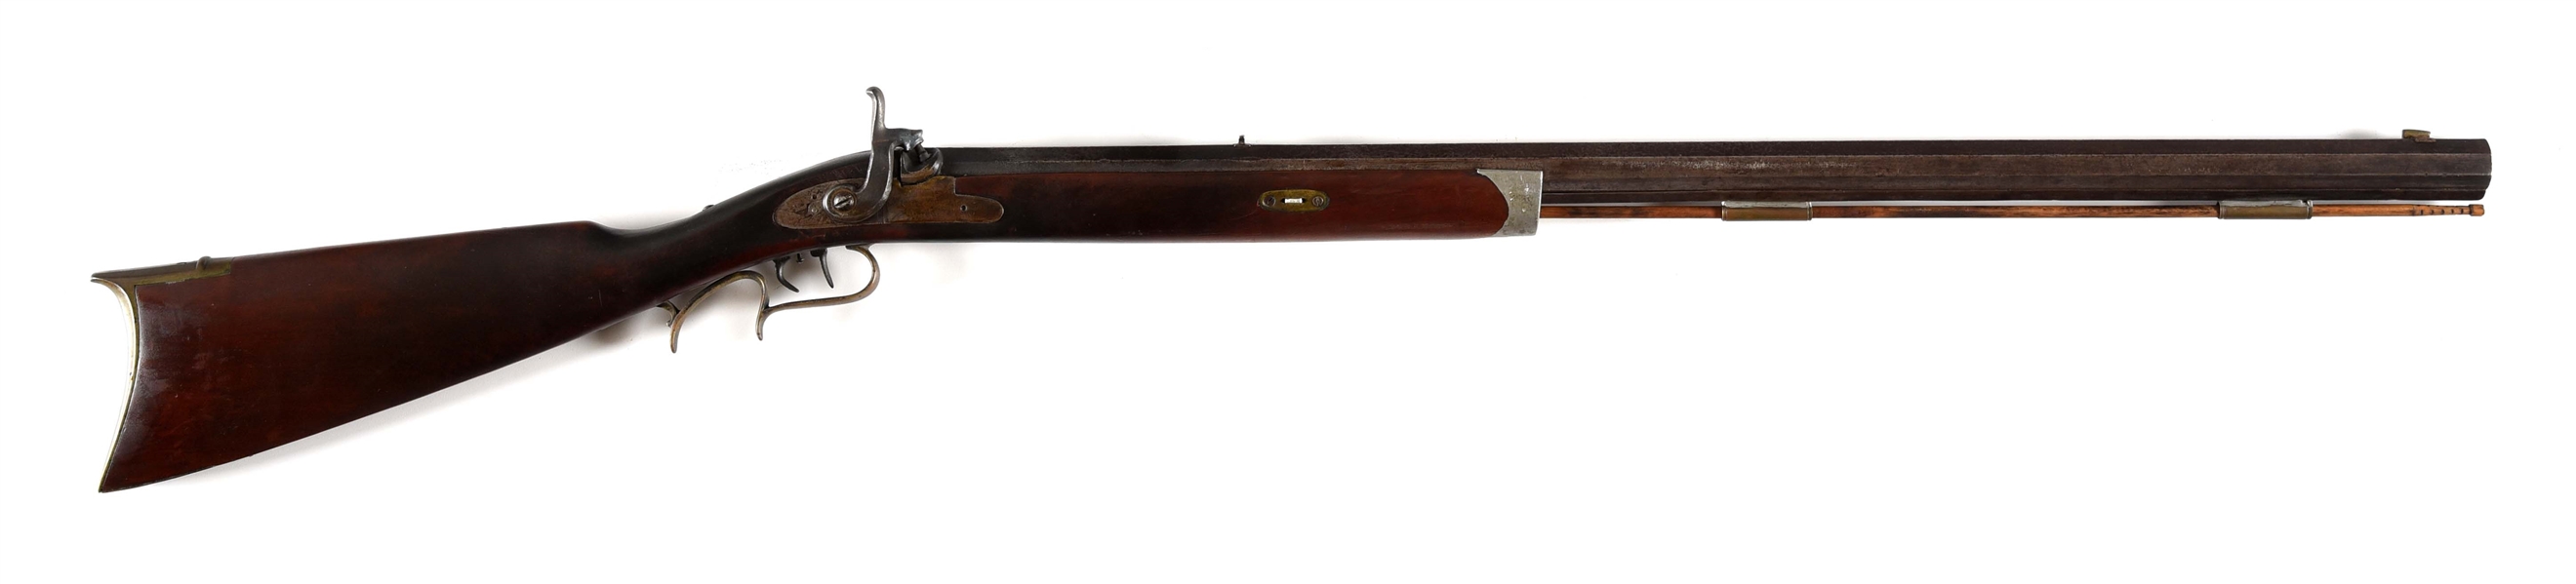 (A) HALFSTOCK PERCUSSION RIFLE WITH BARREL MARKED R. BRUMFIEL.